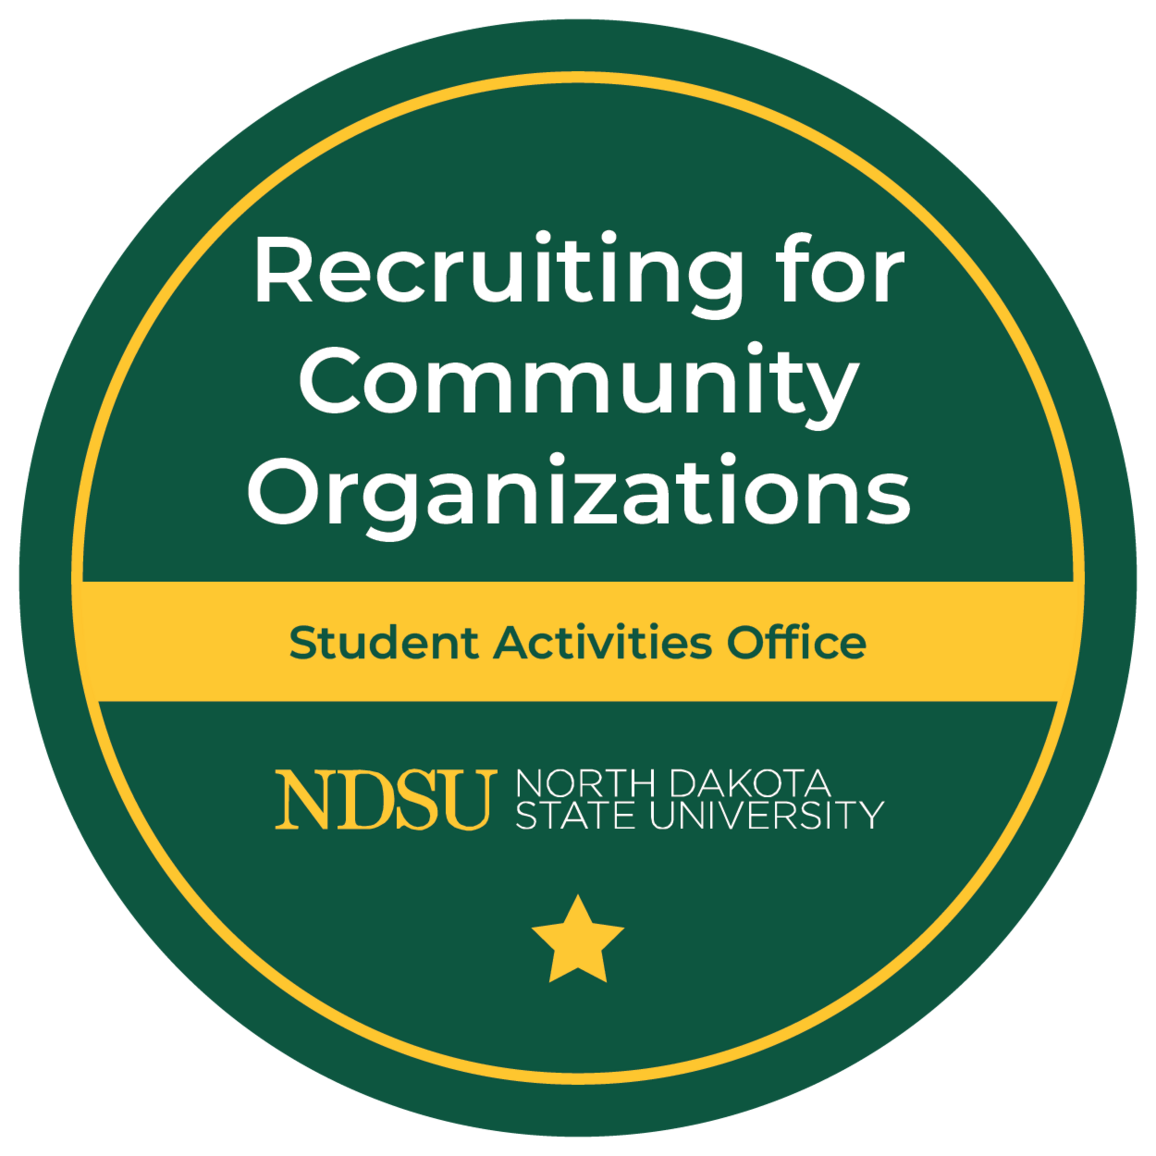 Recruiting for Community Organizations badge